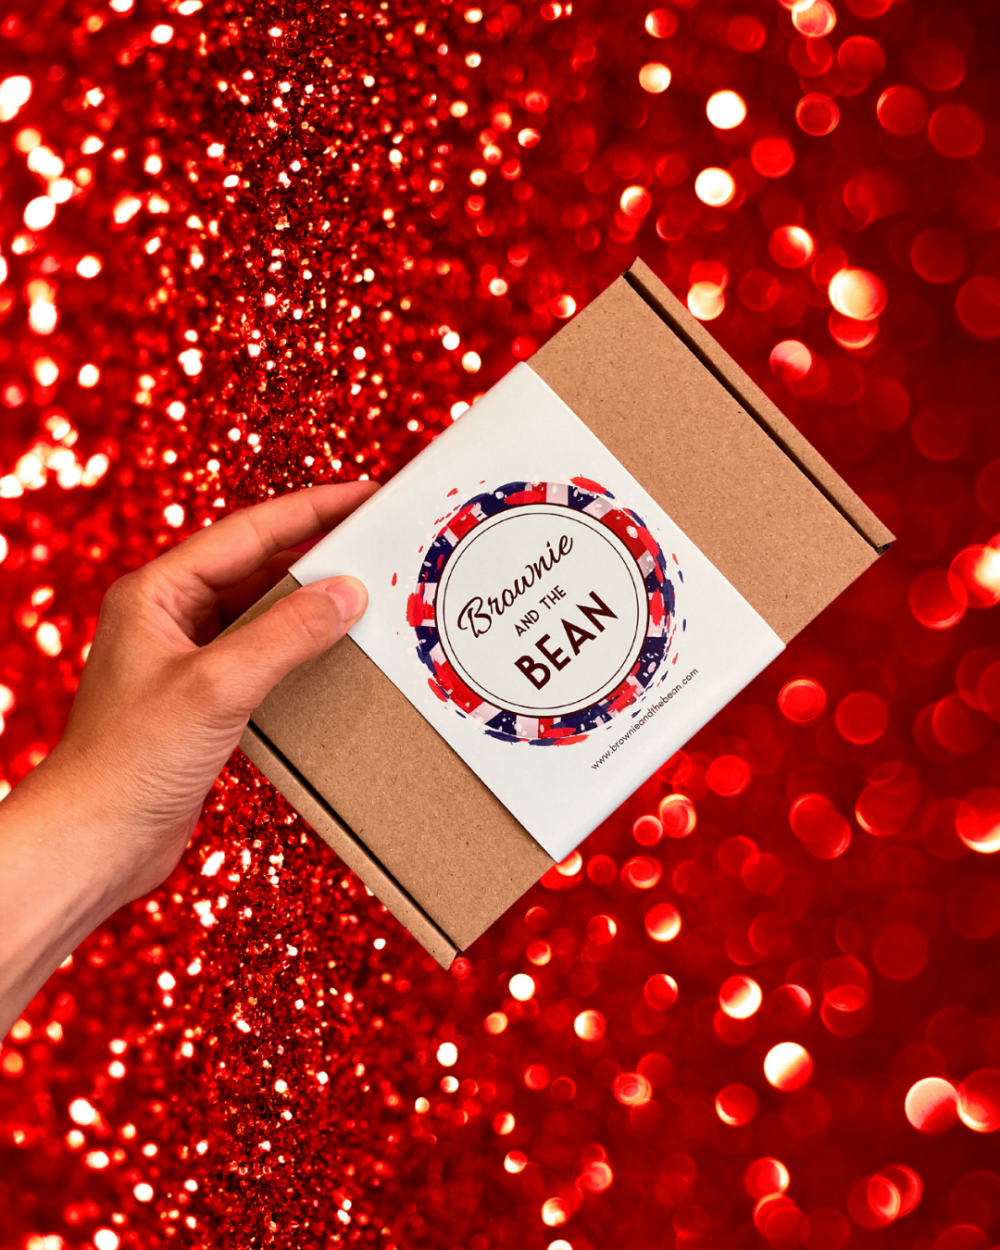 Our Best of British Brownie Box is being held up against a red glittered background. The brownie box has a Union Jack surrounding the Brownie and the Bean logo.